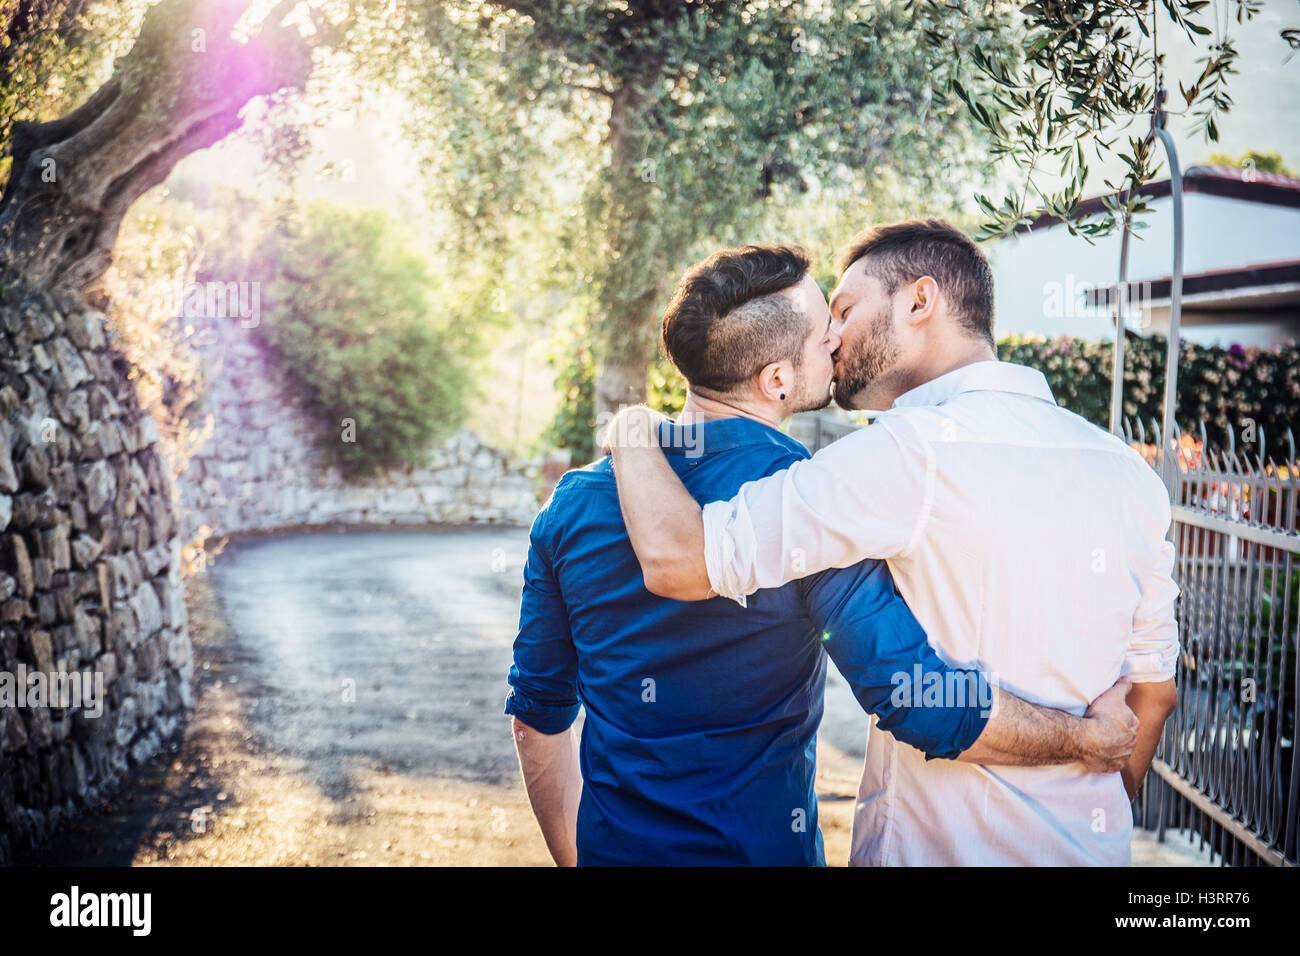 Rear view of stylish handsome men walking on sidewalk and kissing Stock Photo